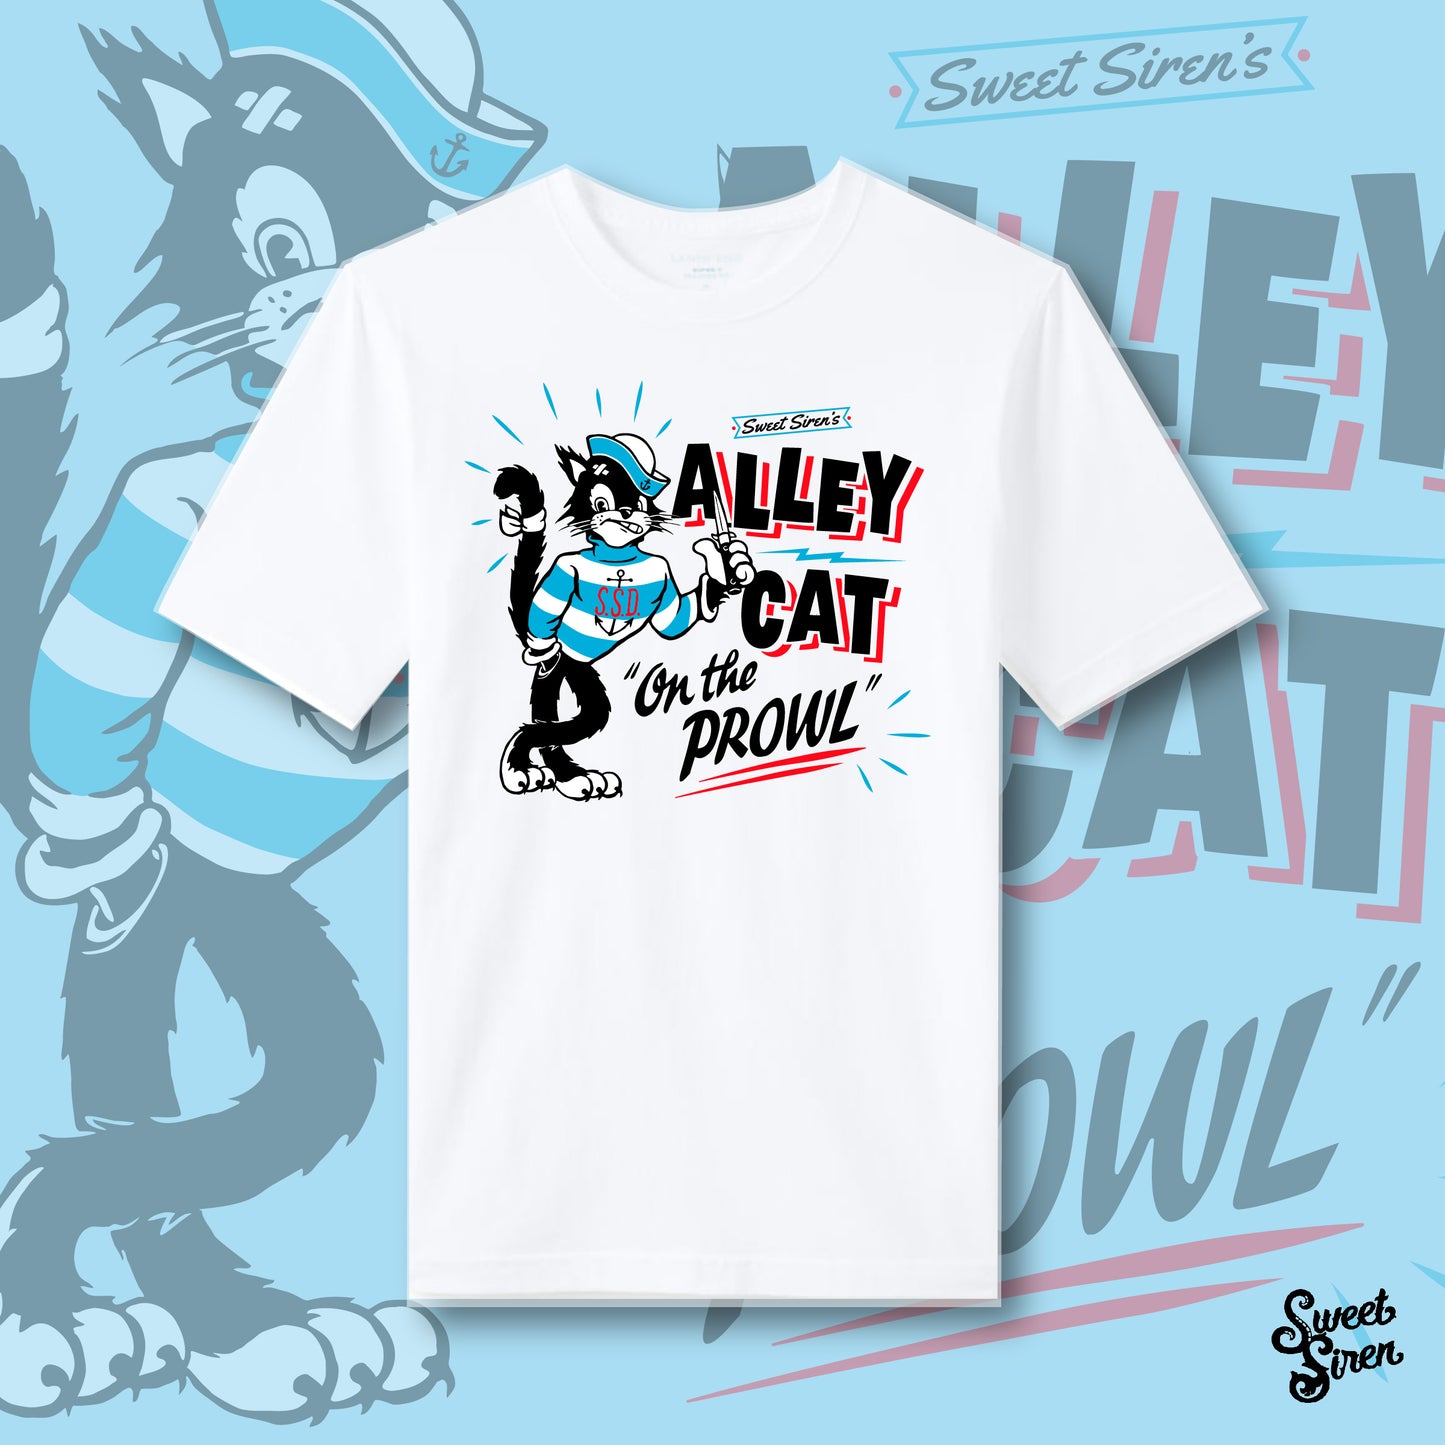 Alley Cat on the Prowl - Unisex Tee